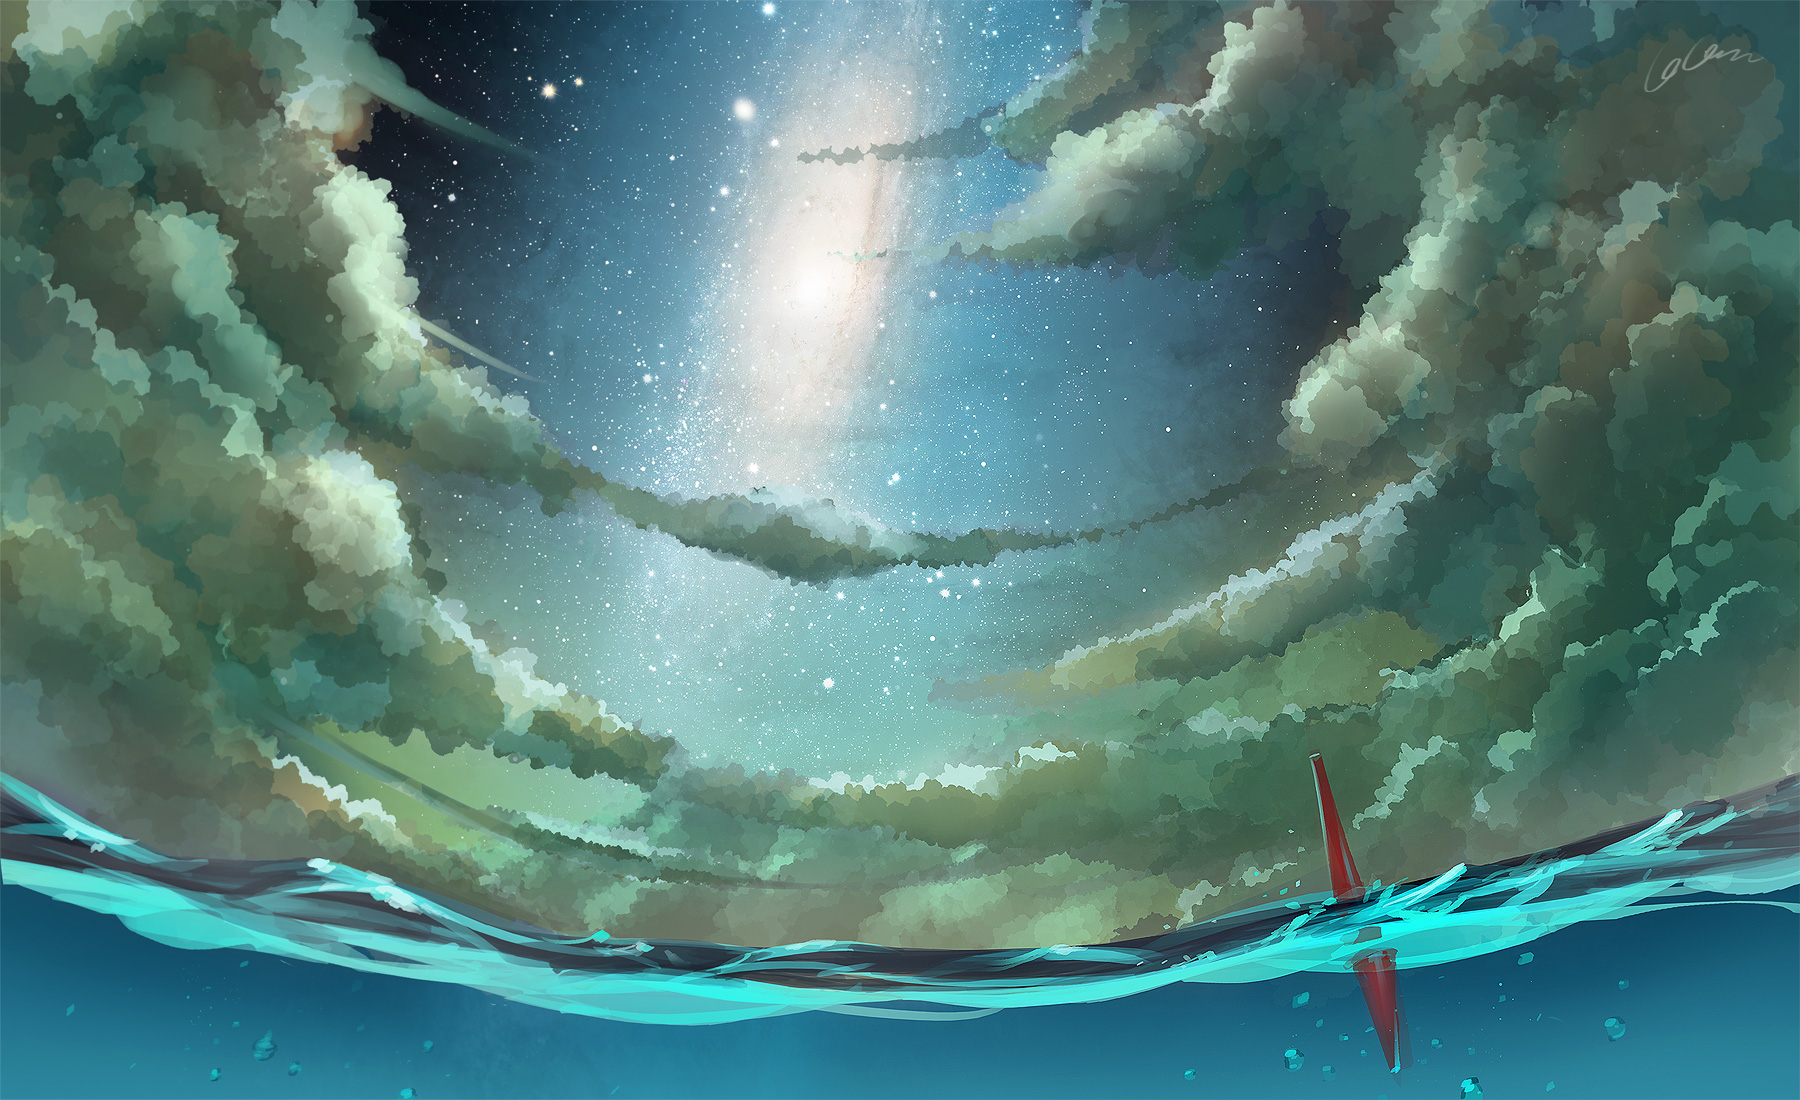 madcocoon, Original, Scenic, Ocean, Sea, Sky, Stars, Clouds, Moon, Anime Wallpaper HD / Desktop and Mobile Background